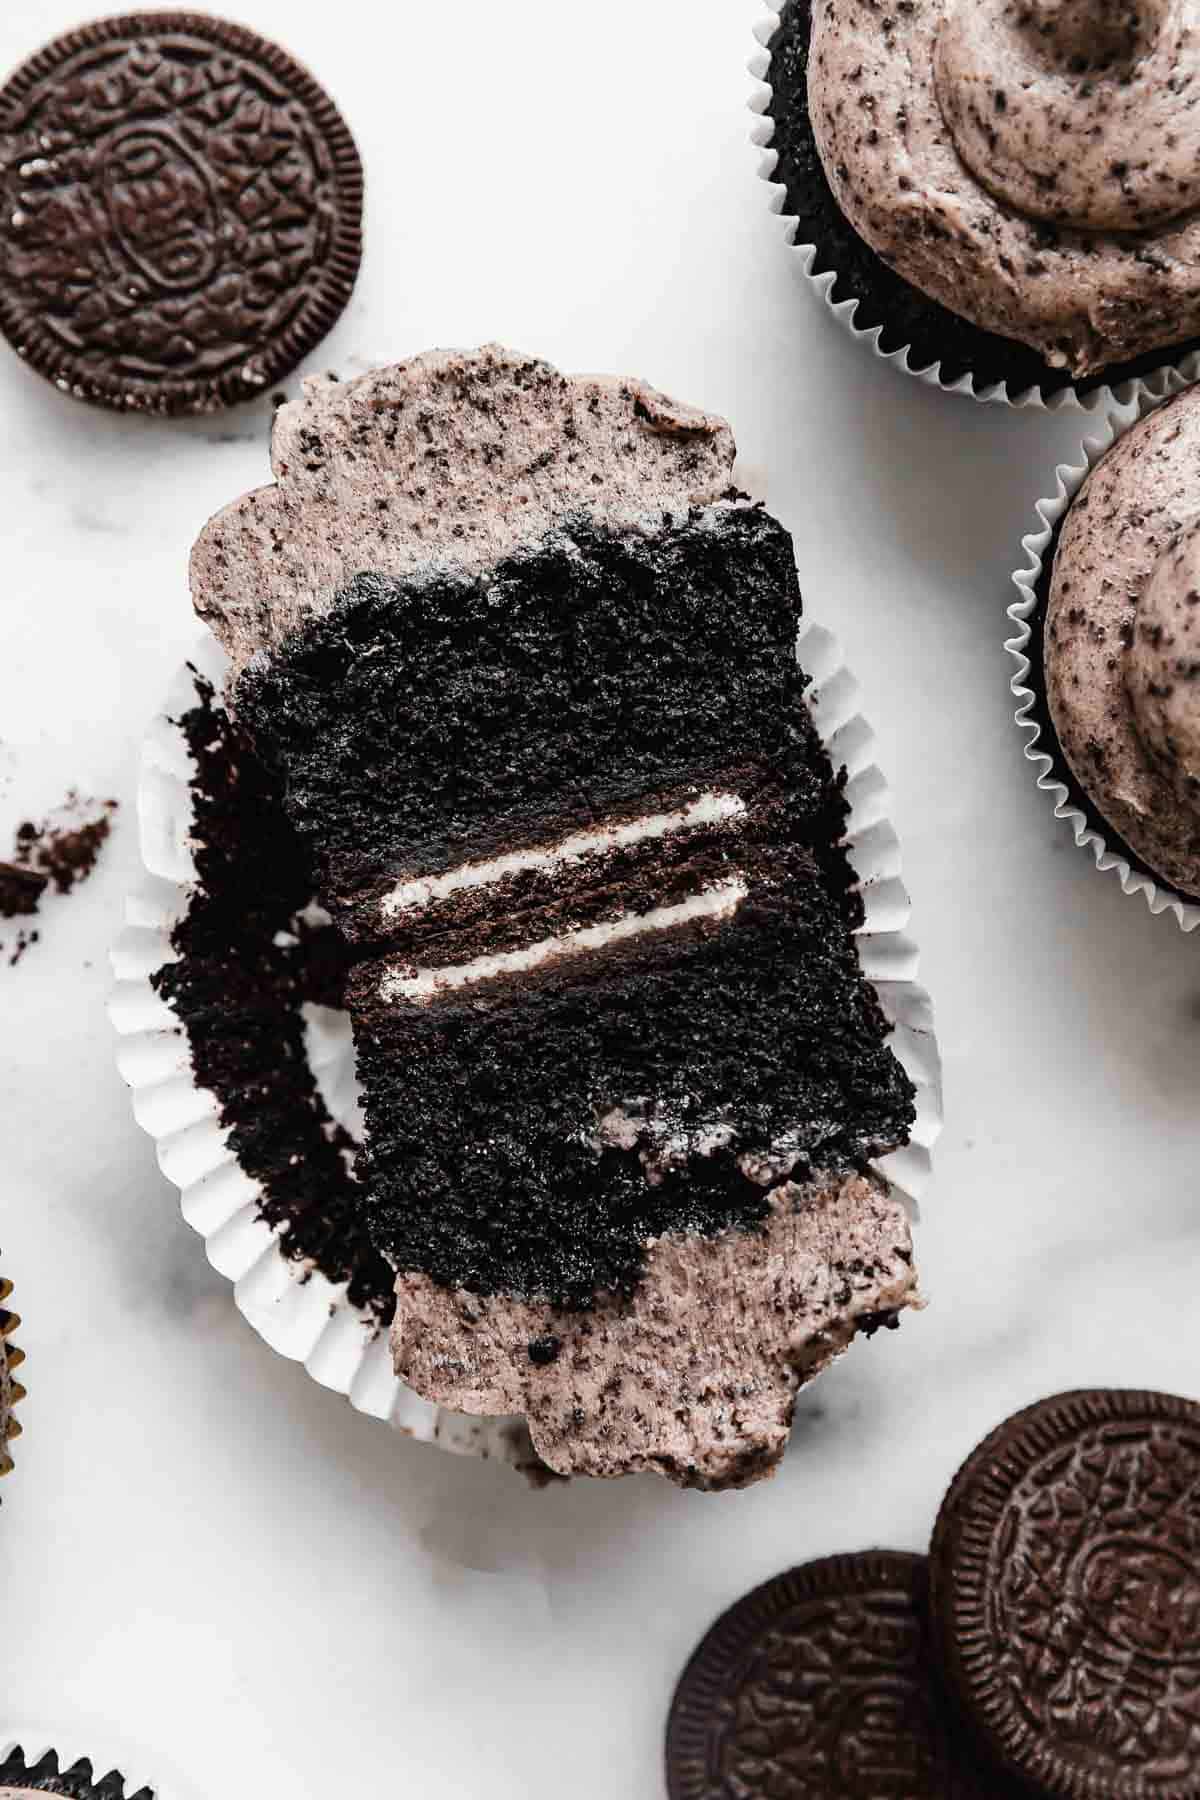 An oreo cupcake cut in half, showing that the Oreo cupcake was baked on a full Oreo cookie.